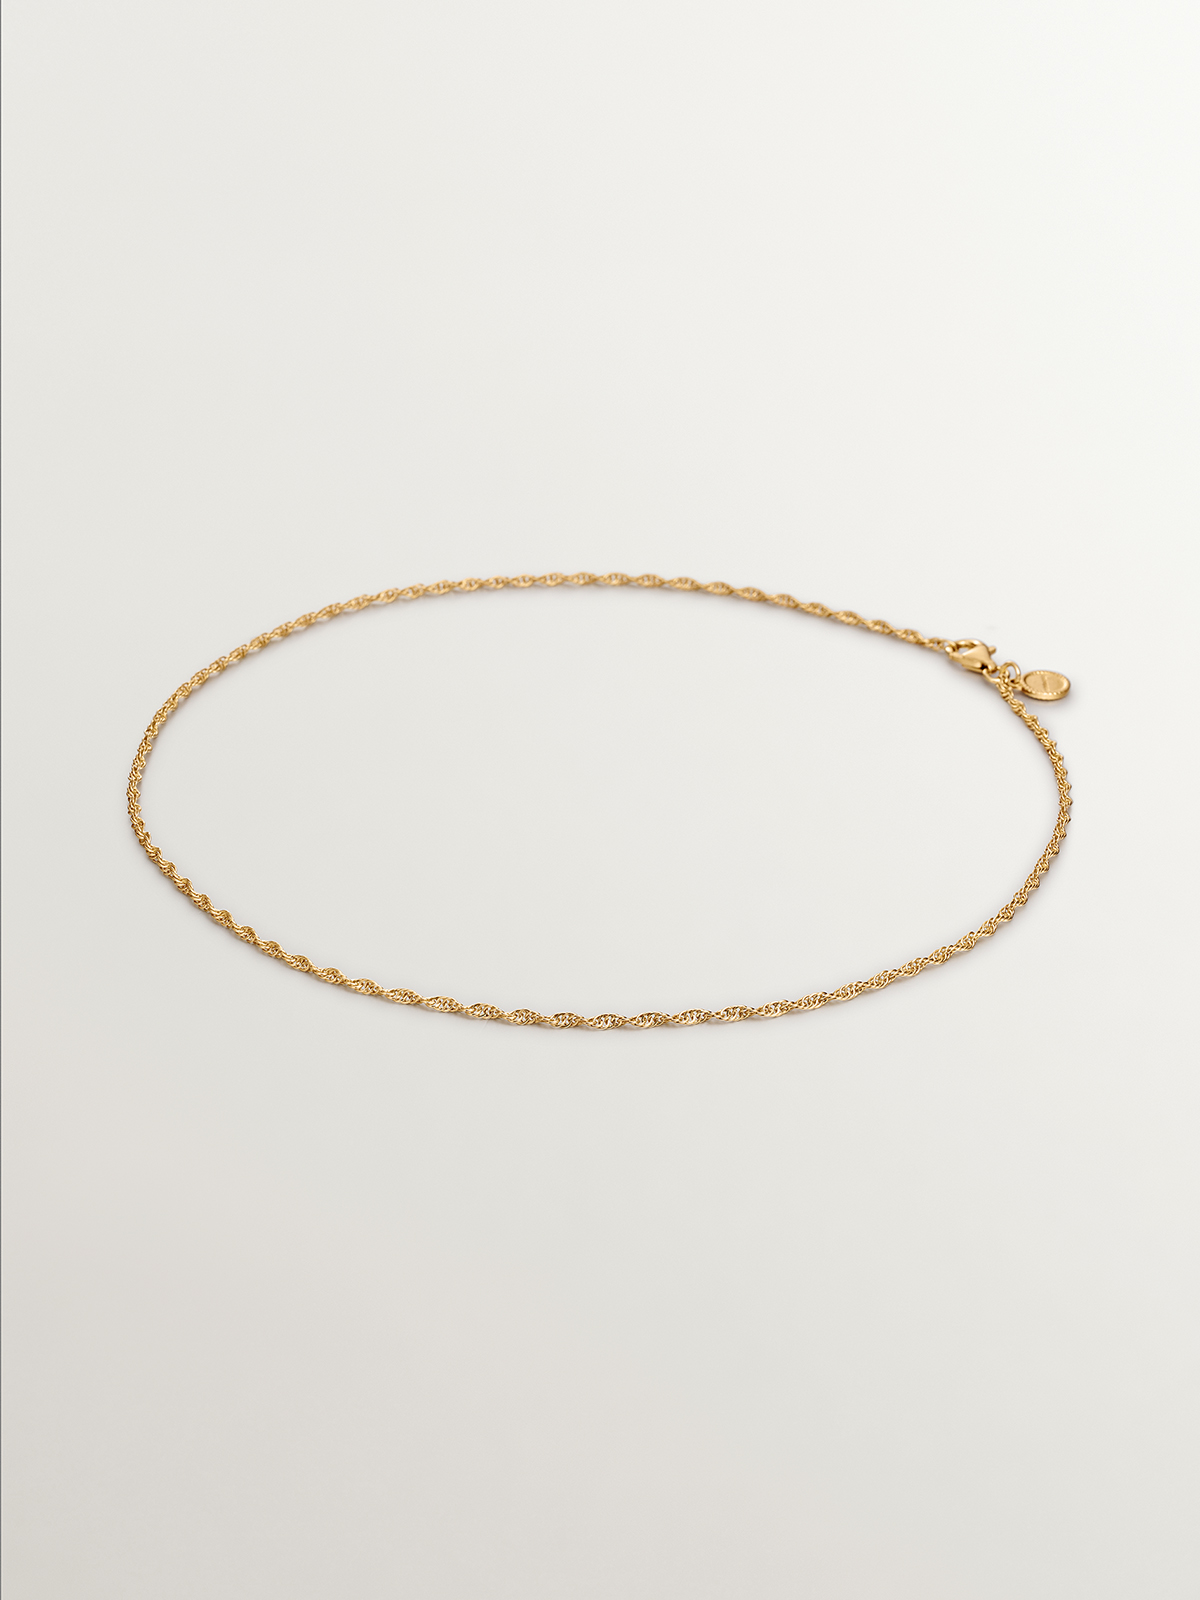 925 Silver Rope Link Chain coated in 18k Yellow Gold